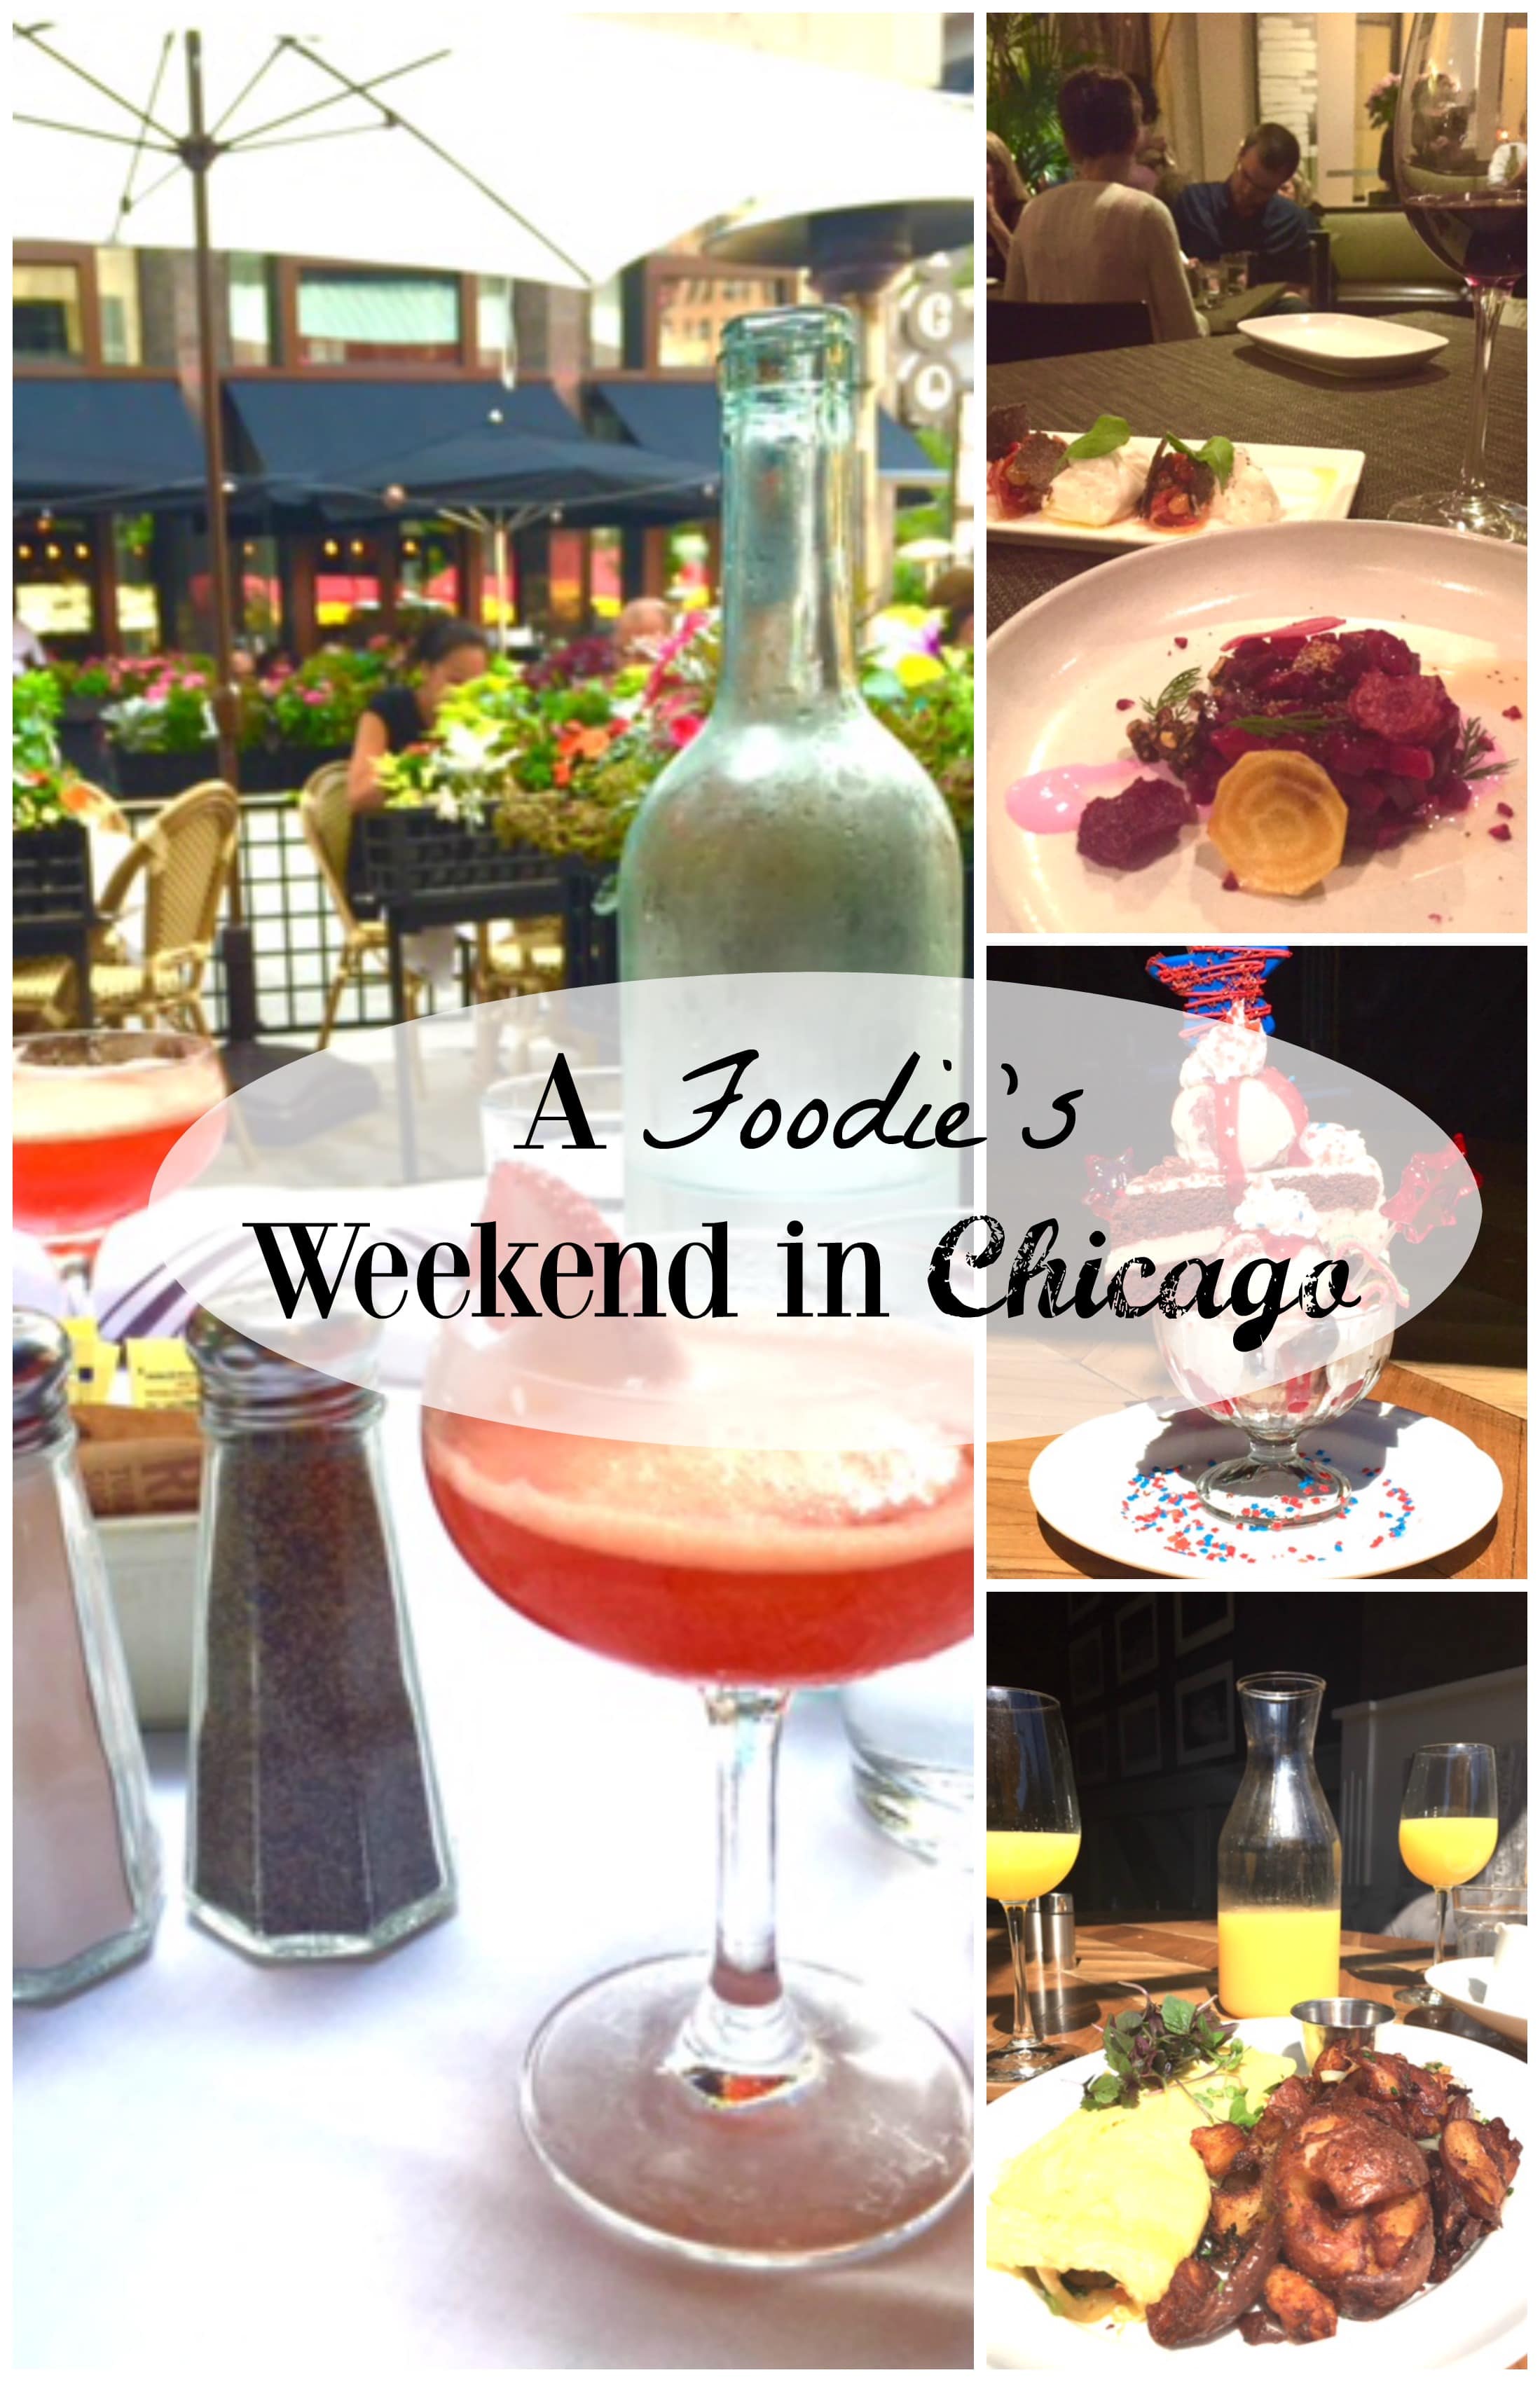 A Foodie's Weekend in Chicago from Lauren Kelly Nutrition